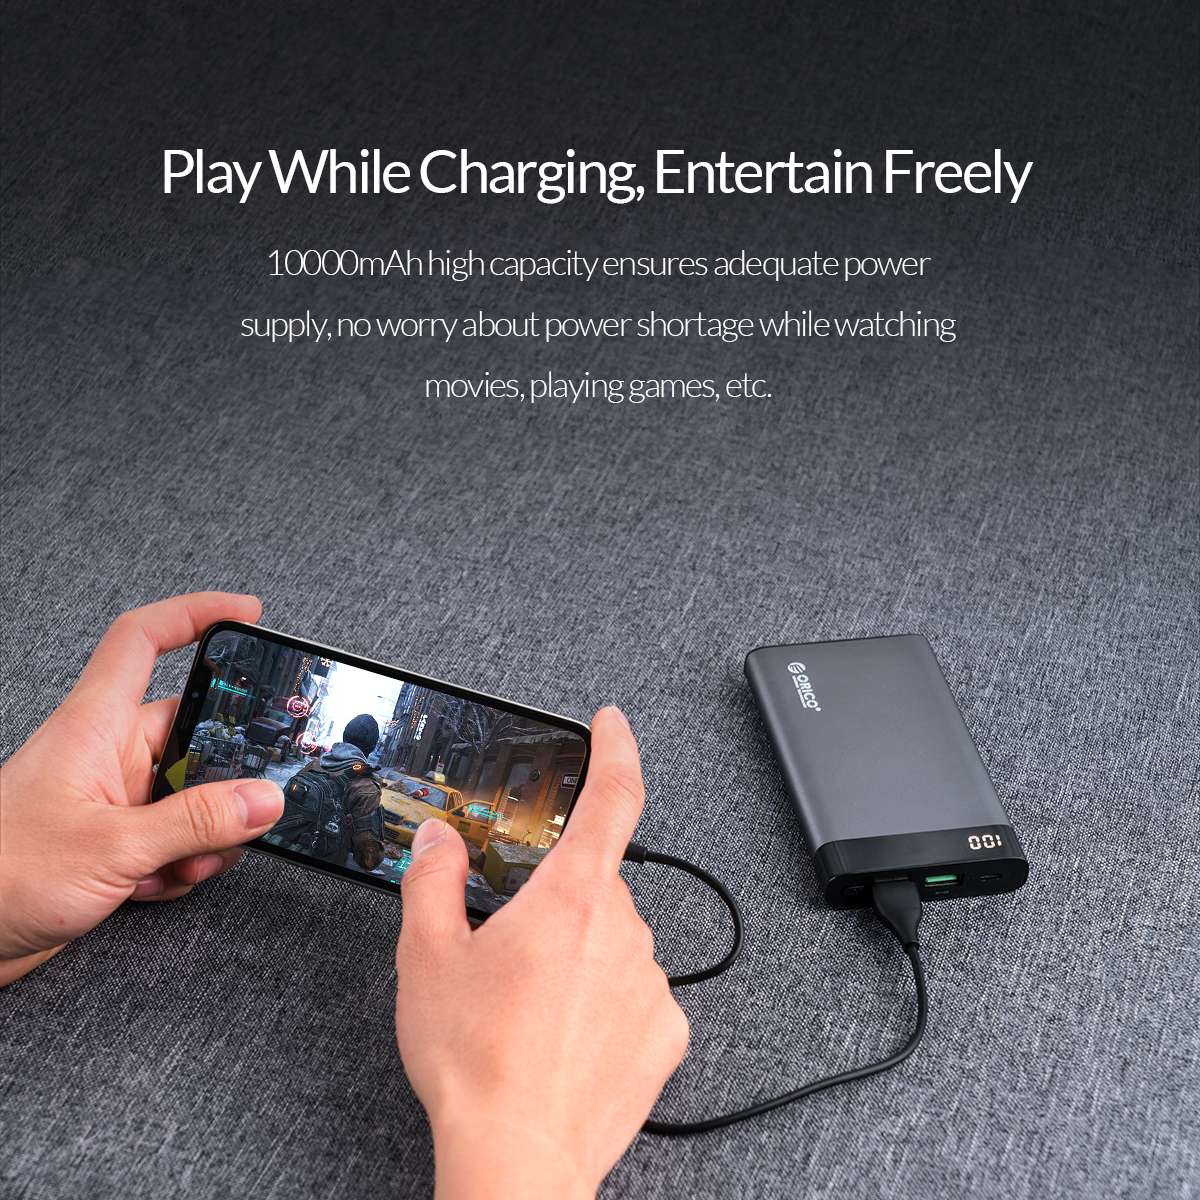 play while charging entertain freely